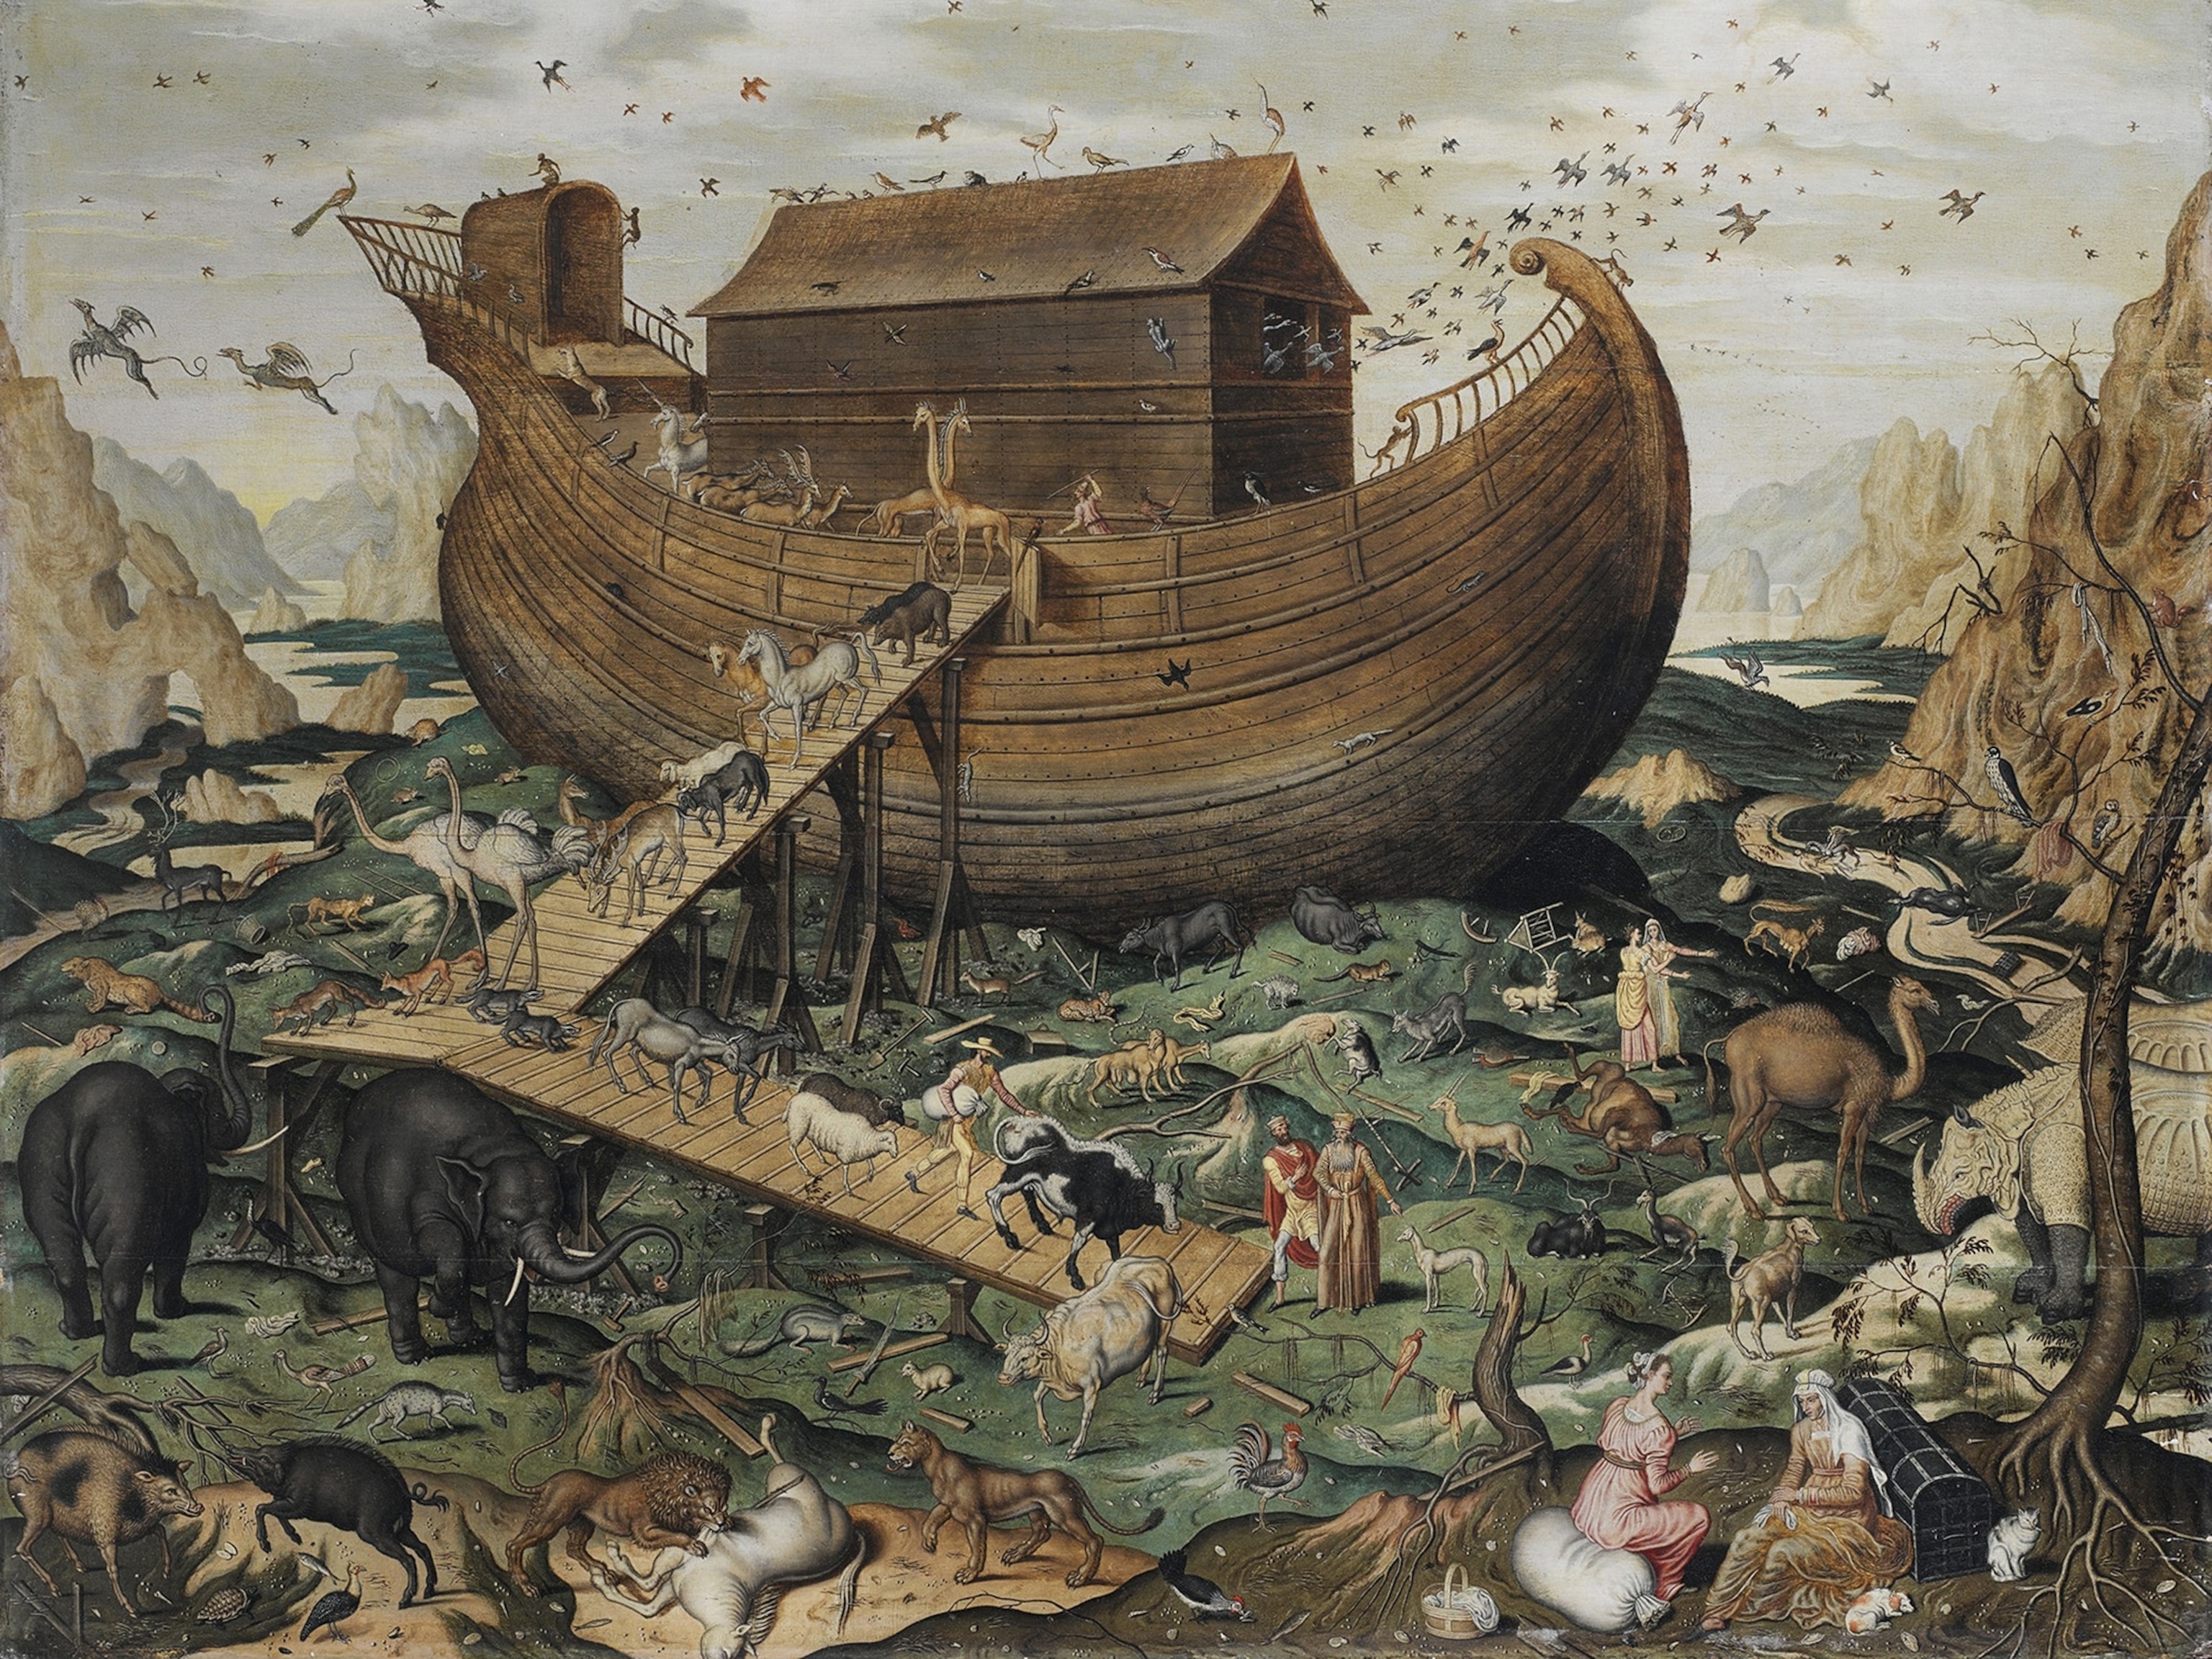 Noah's Ark on Mount Ararat with animals flooding out.